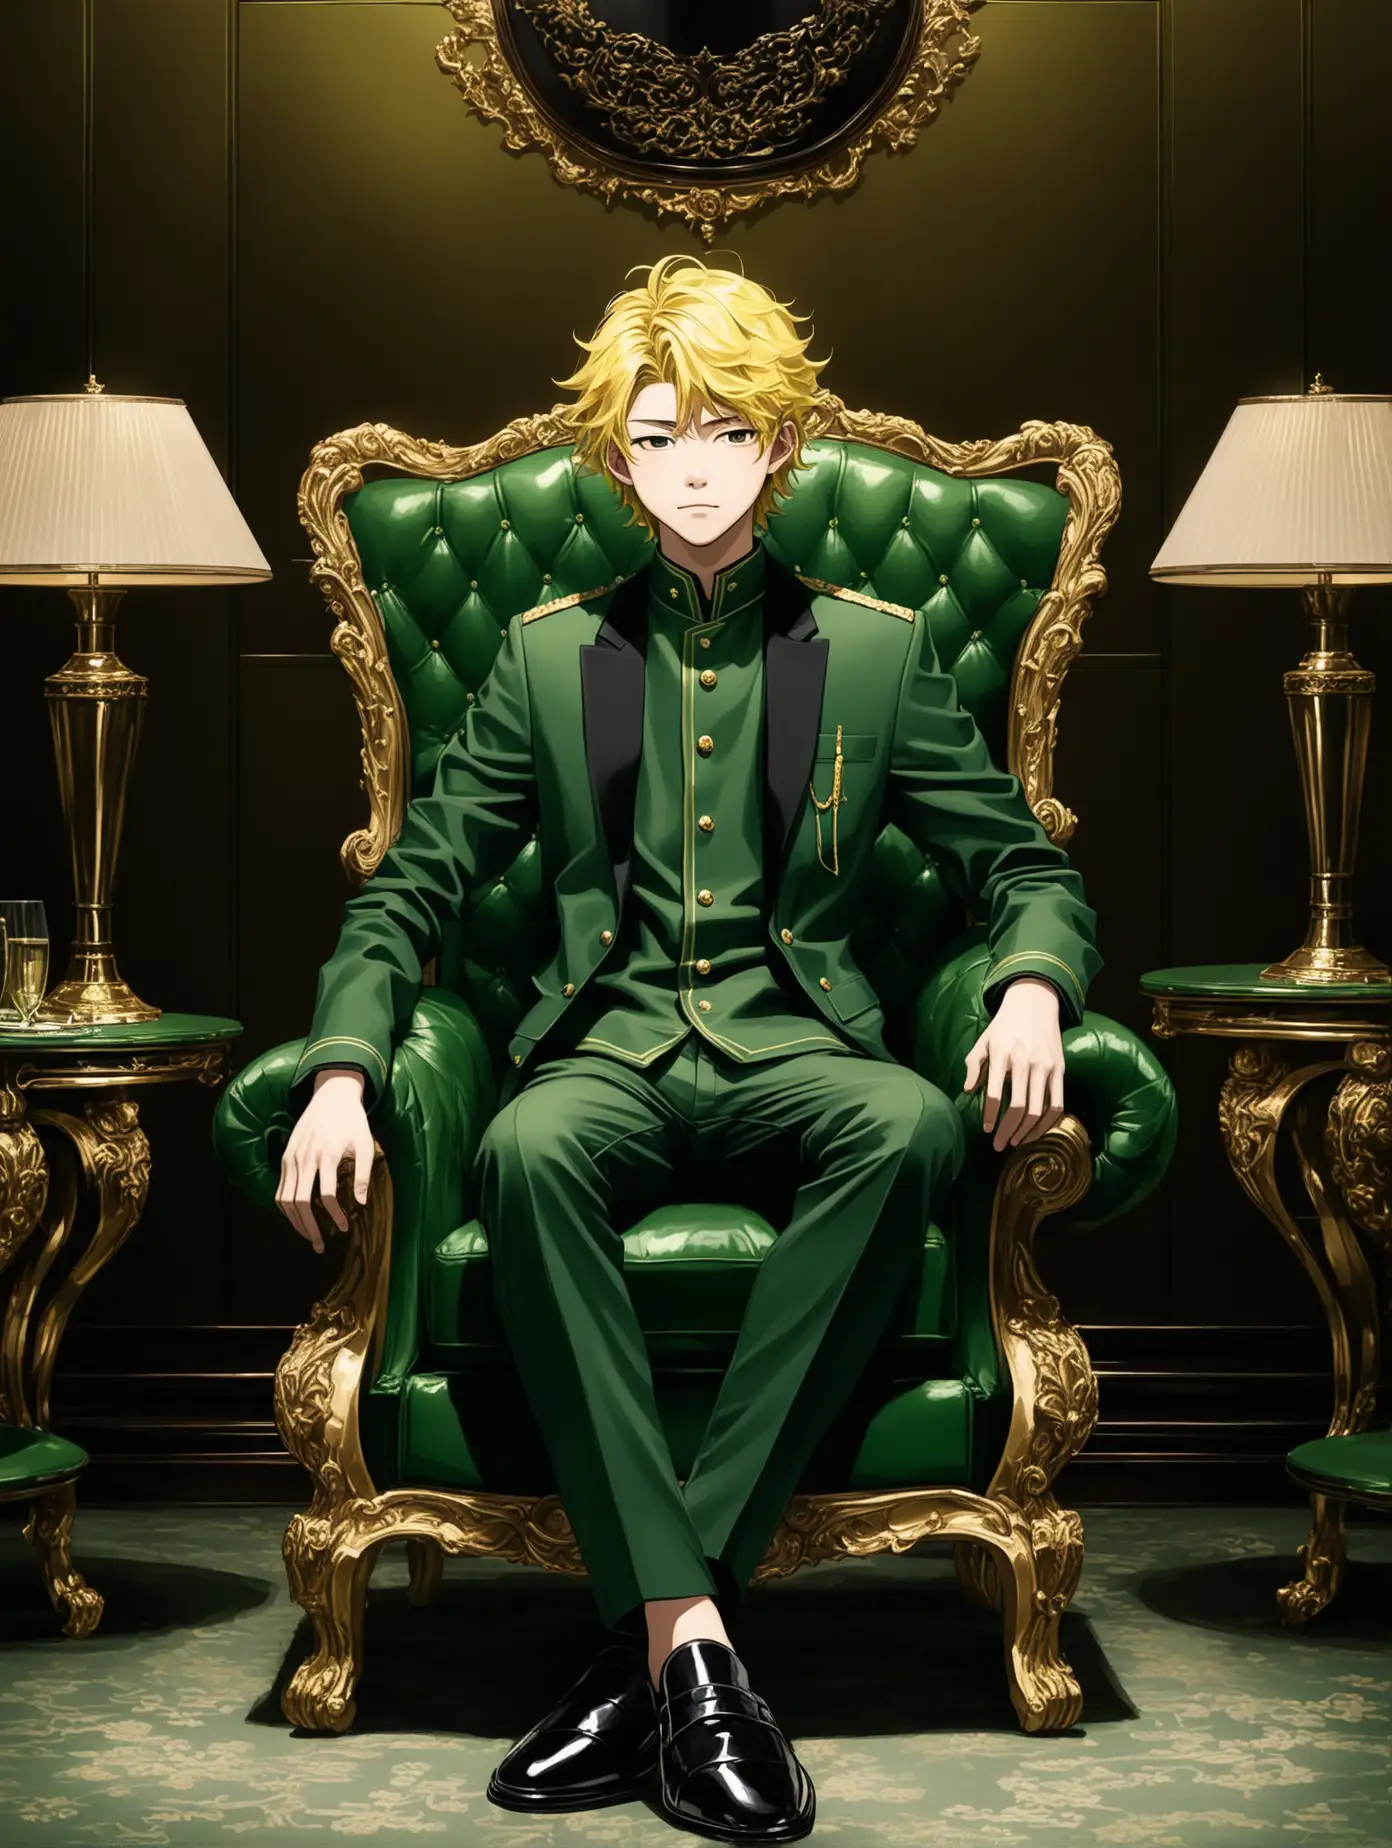 image of a 16 year old Japanese man with wavy yellow hair, wearing a dark green uniform, trousers and a dark green jacket, wearing black shoes, sitting in a luxurious green chair, in a luxurious room dominated by dark green